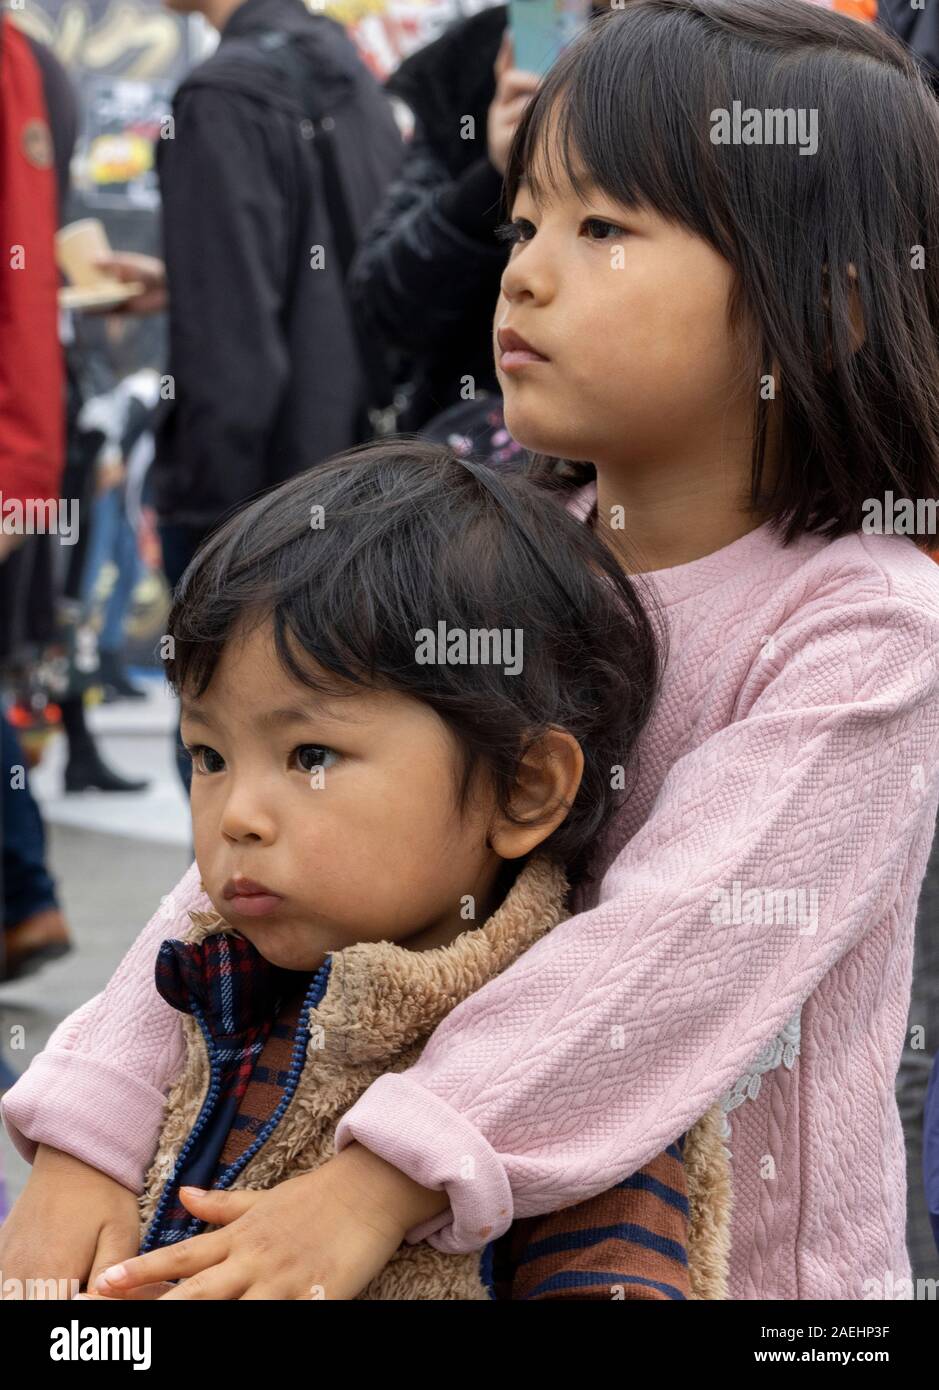 Japanese girl holding her baby brother, Tokyo, Japan Stock Photo